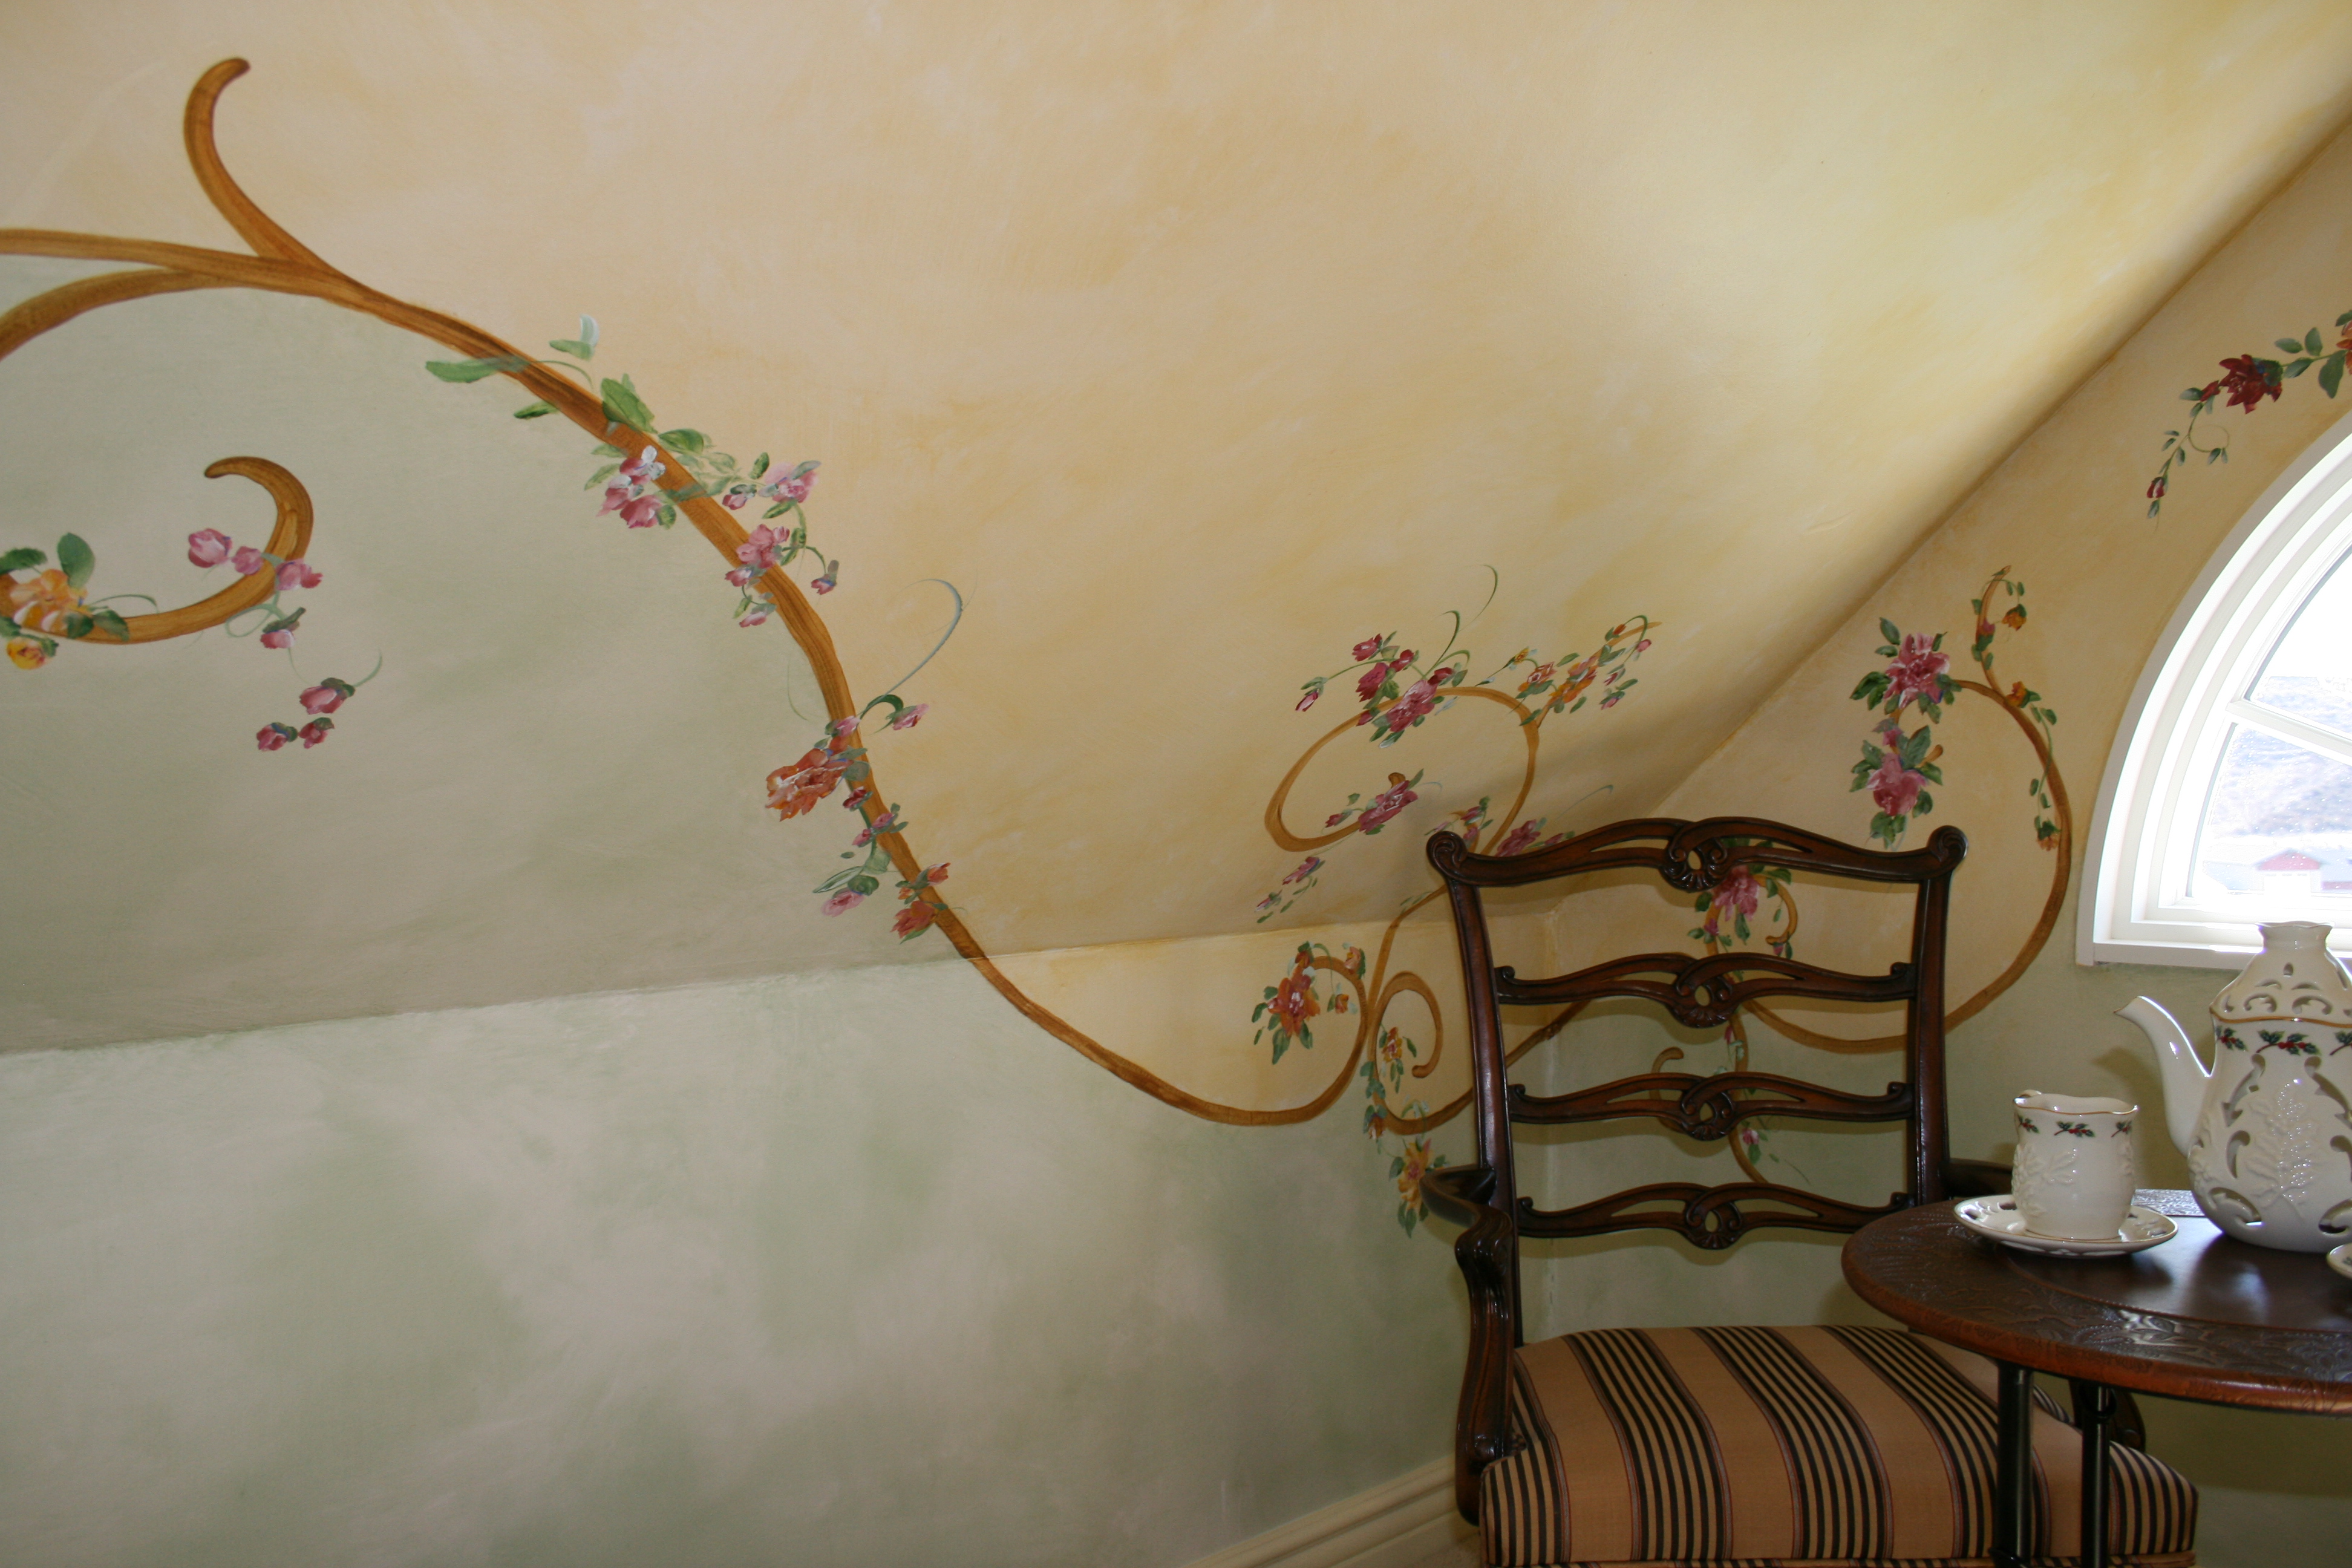 American Doll Furniture Room - Hand painted vines & Scrolls in a children's play room